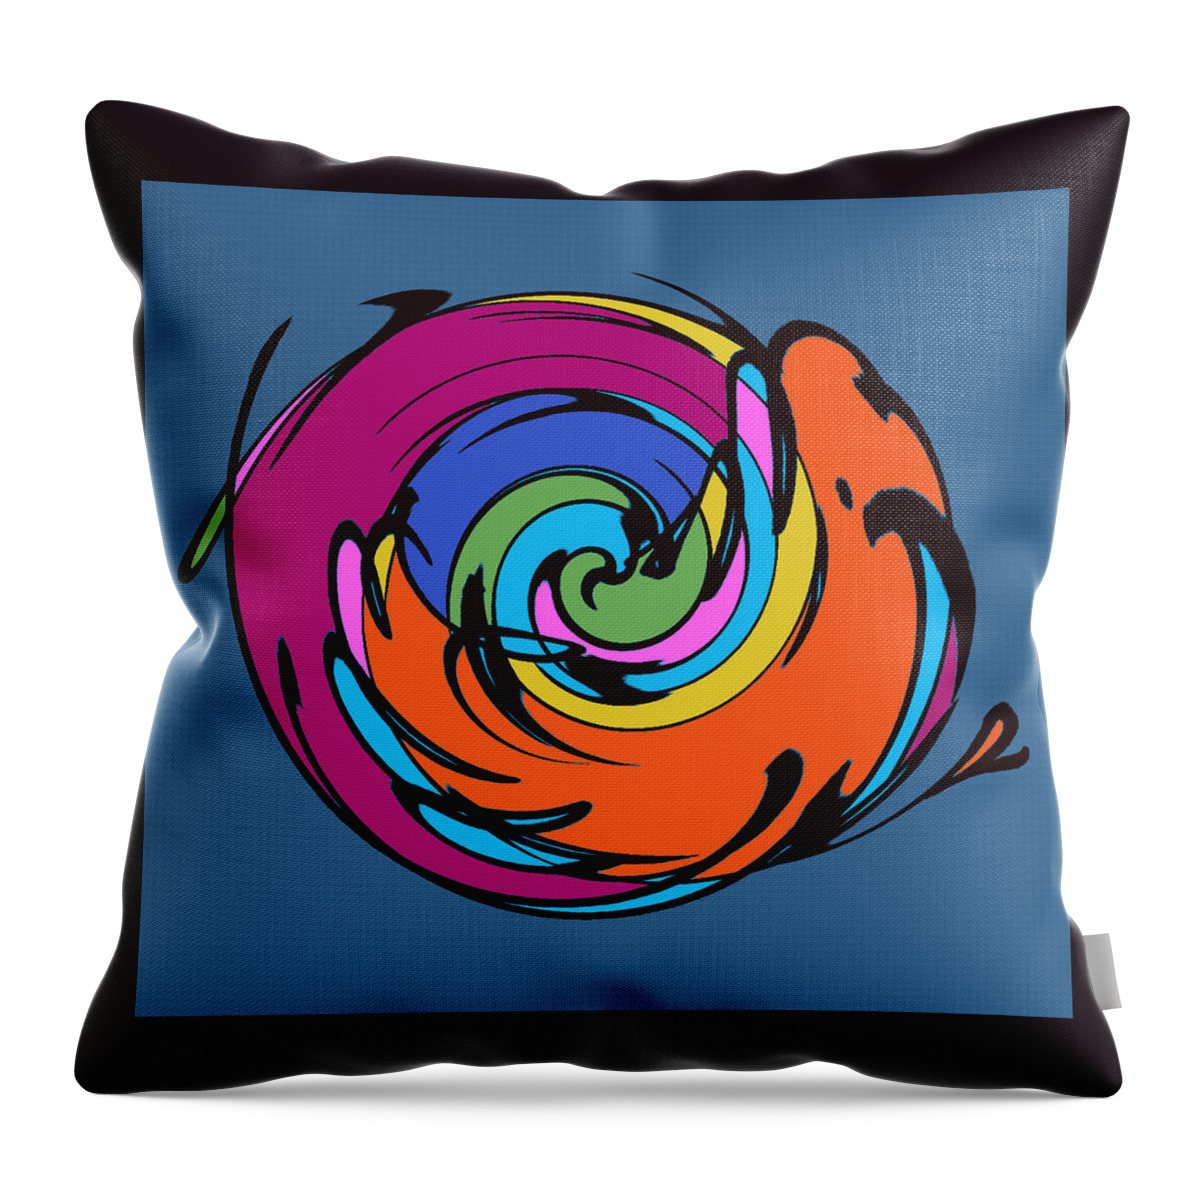 Abstract Throw Pillow featuring the digital art Abstract Signature by Ronald Mills